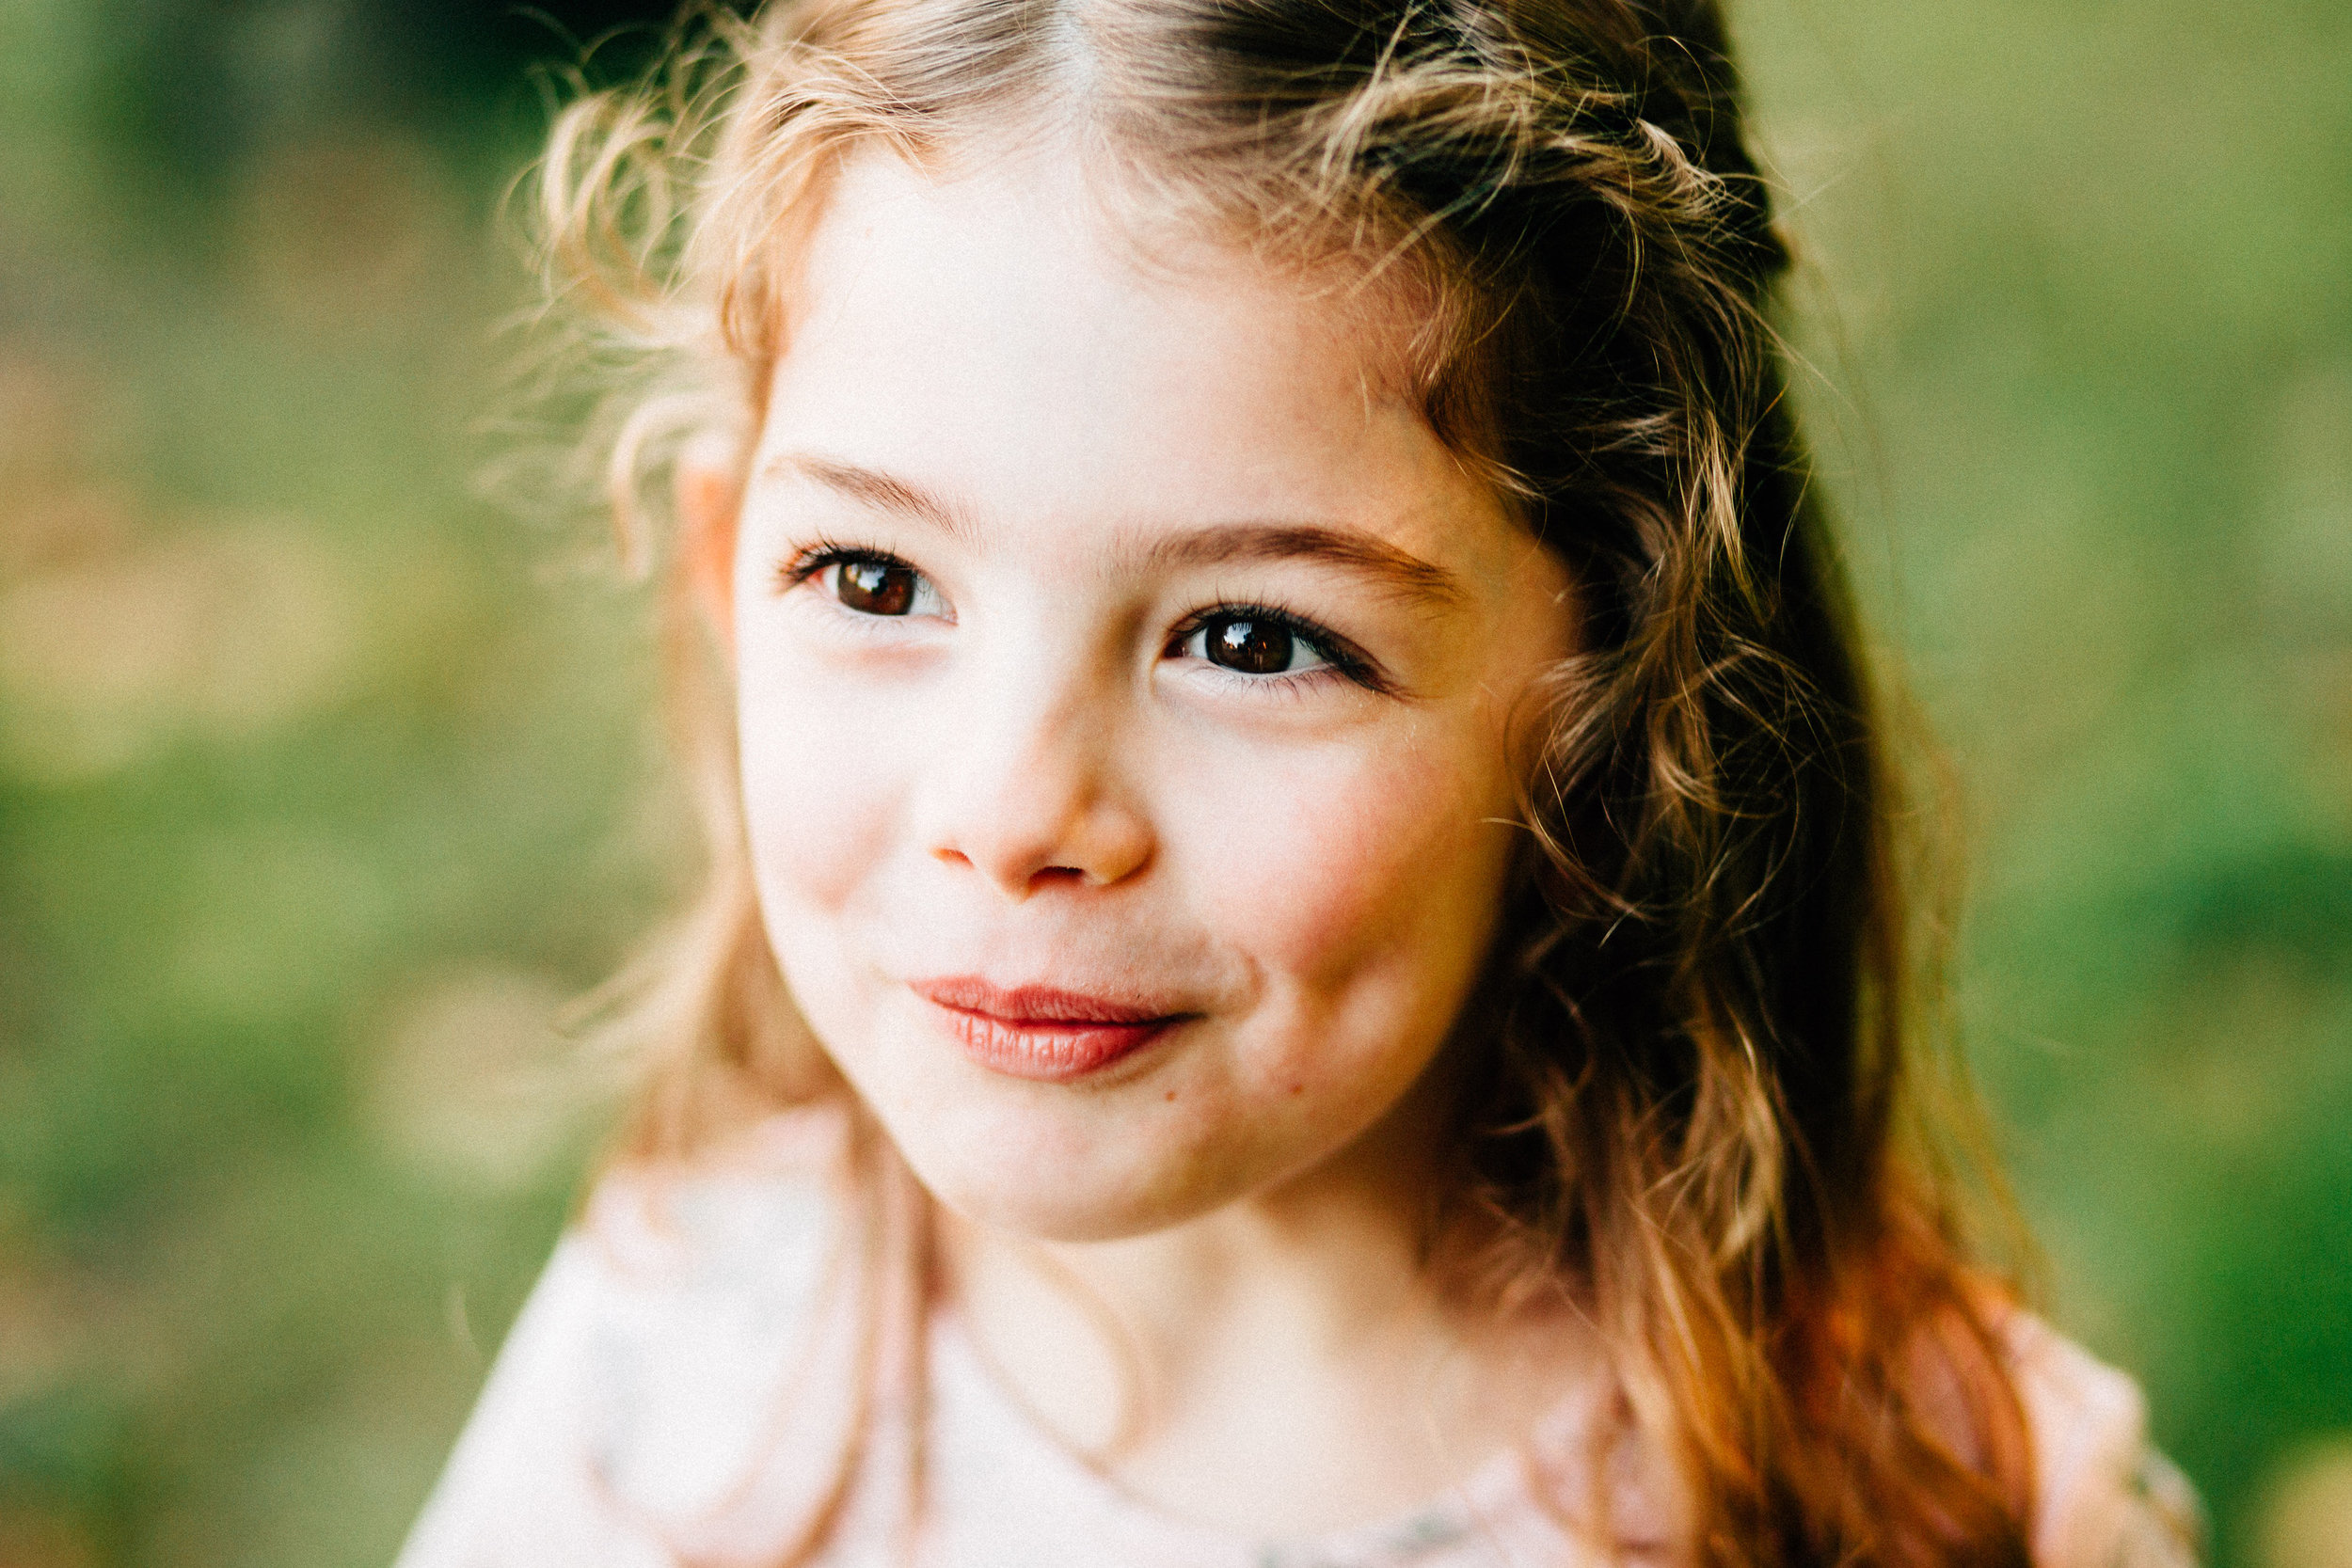 Vancouver mother daughter session - Emmy Lou Virginia Photography.jpg